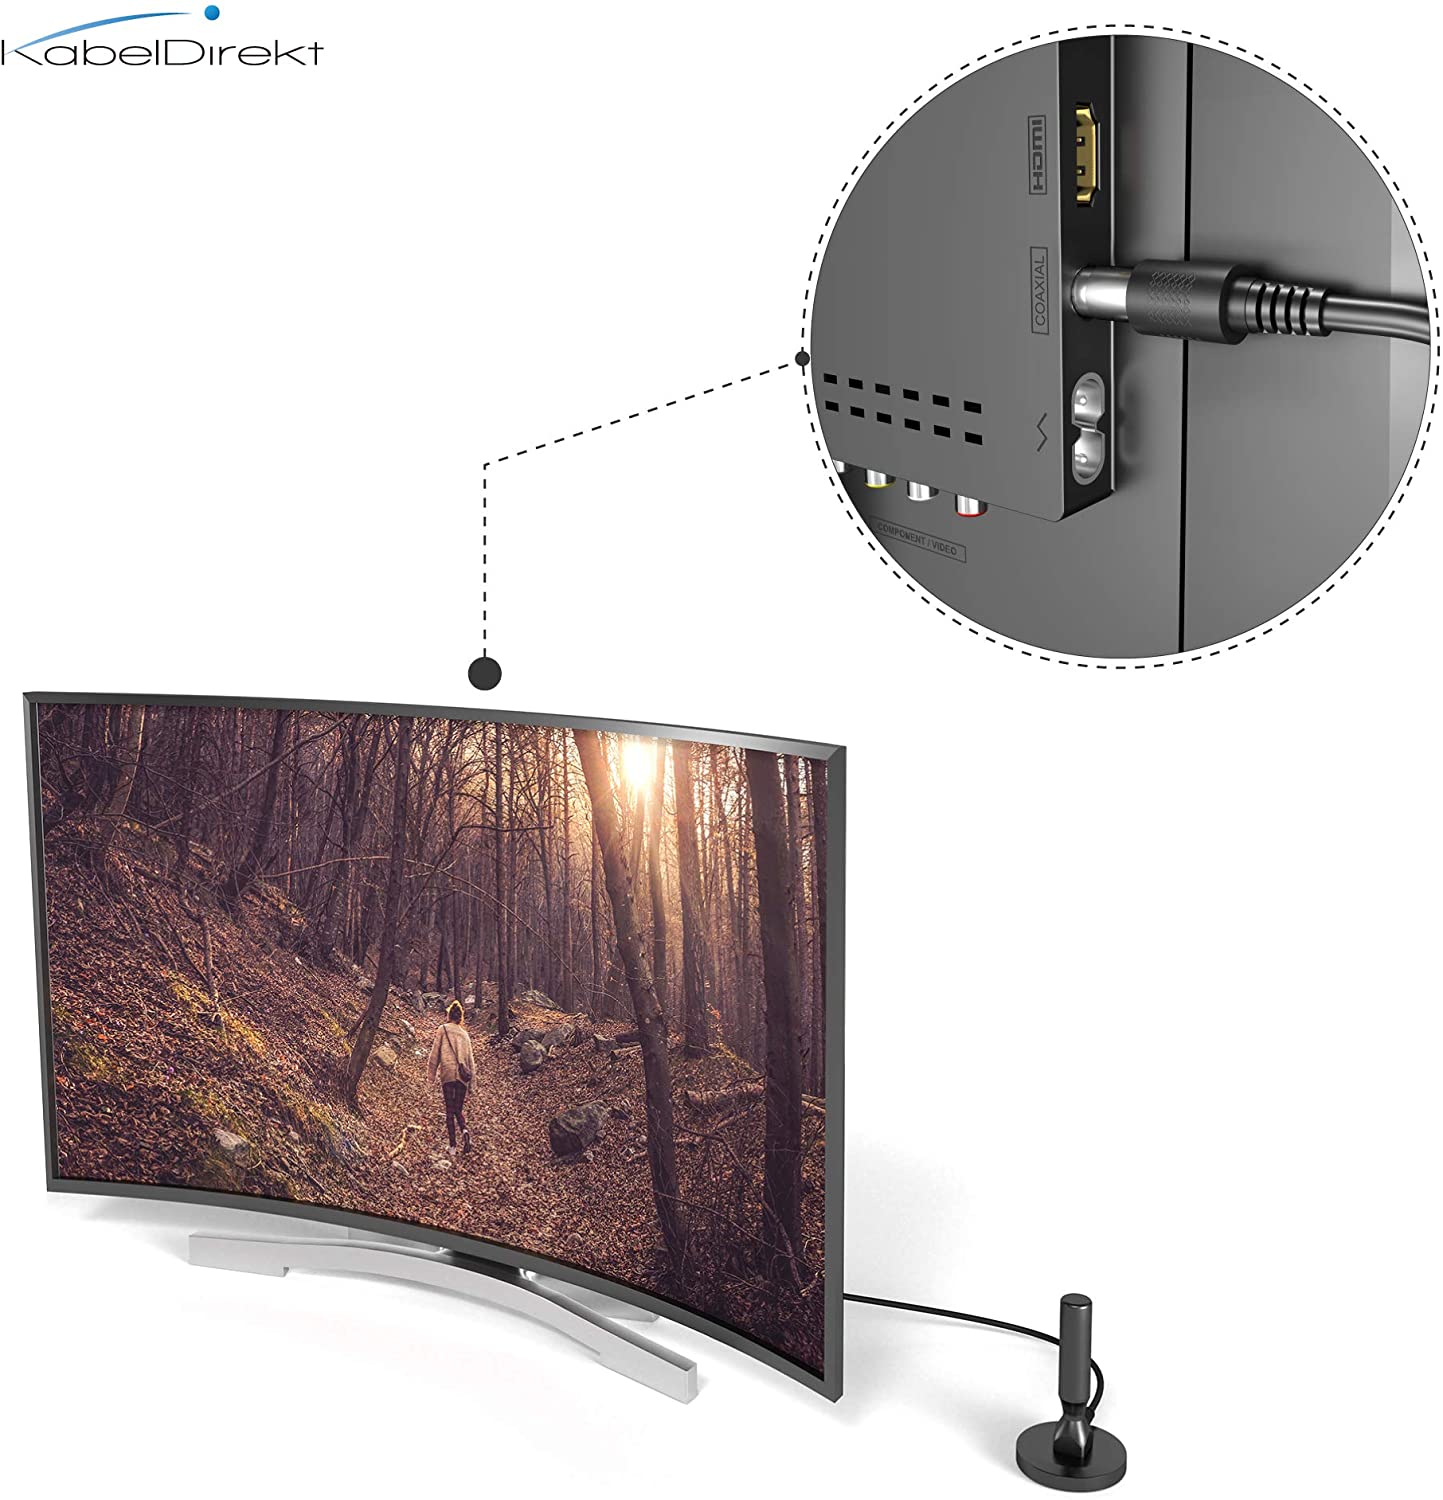 DVB-T/T2 antenna - TV and radio - 3m cable length - robust design